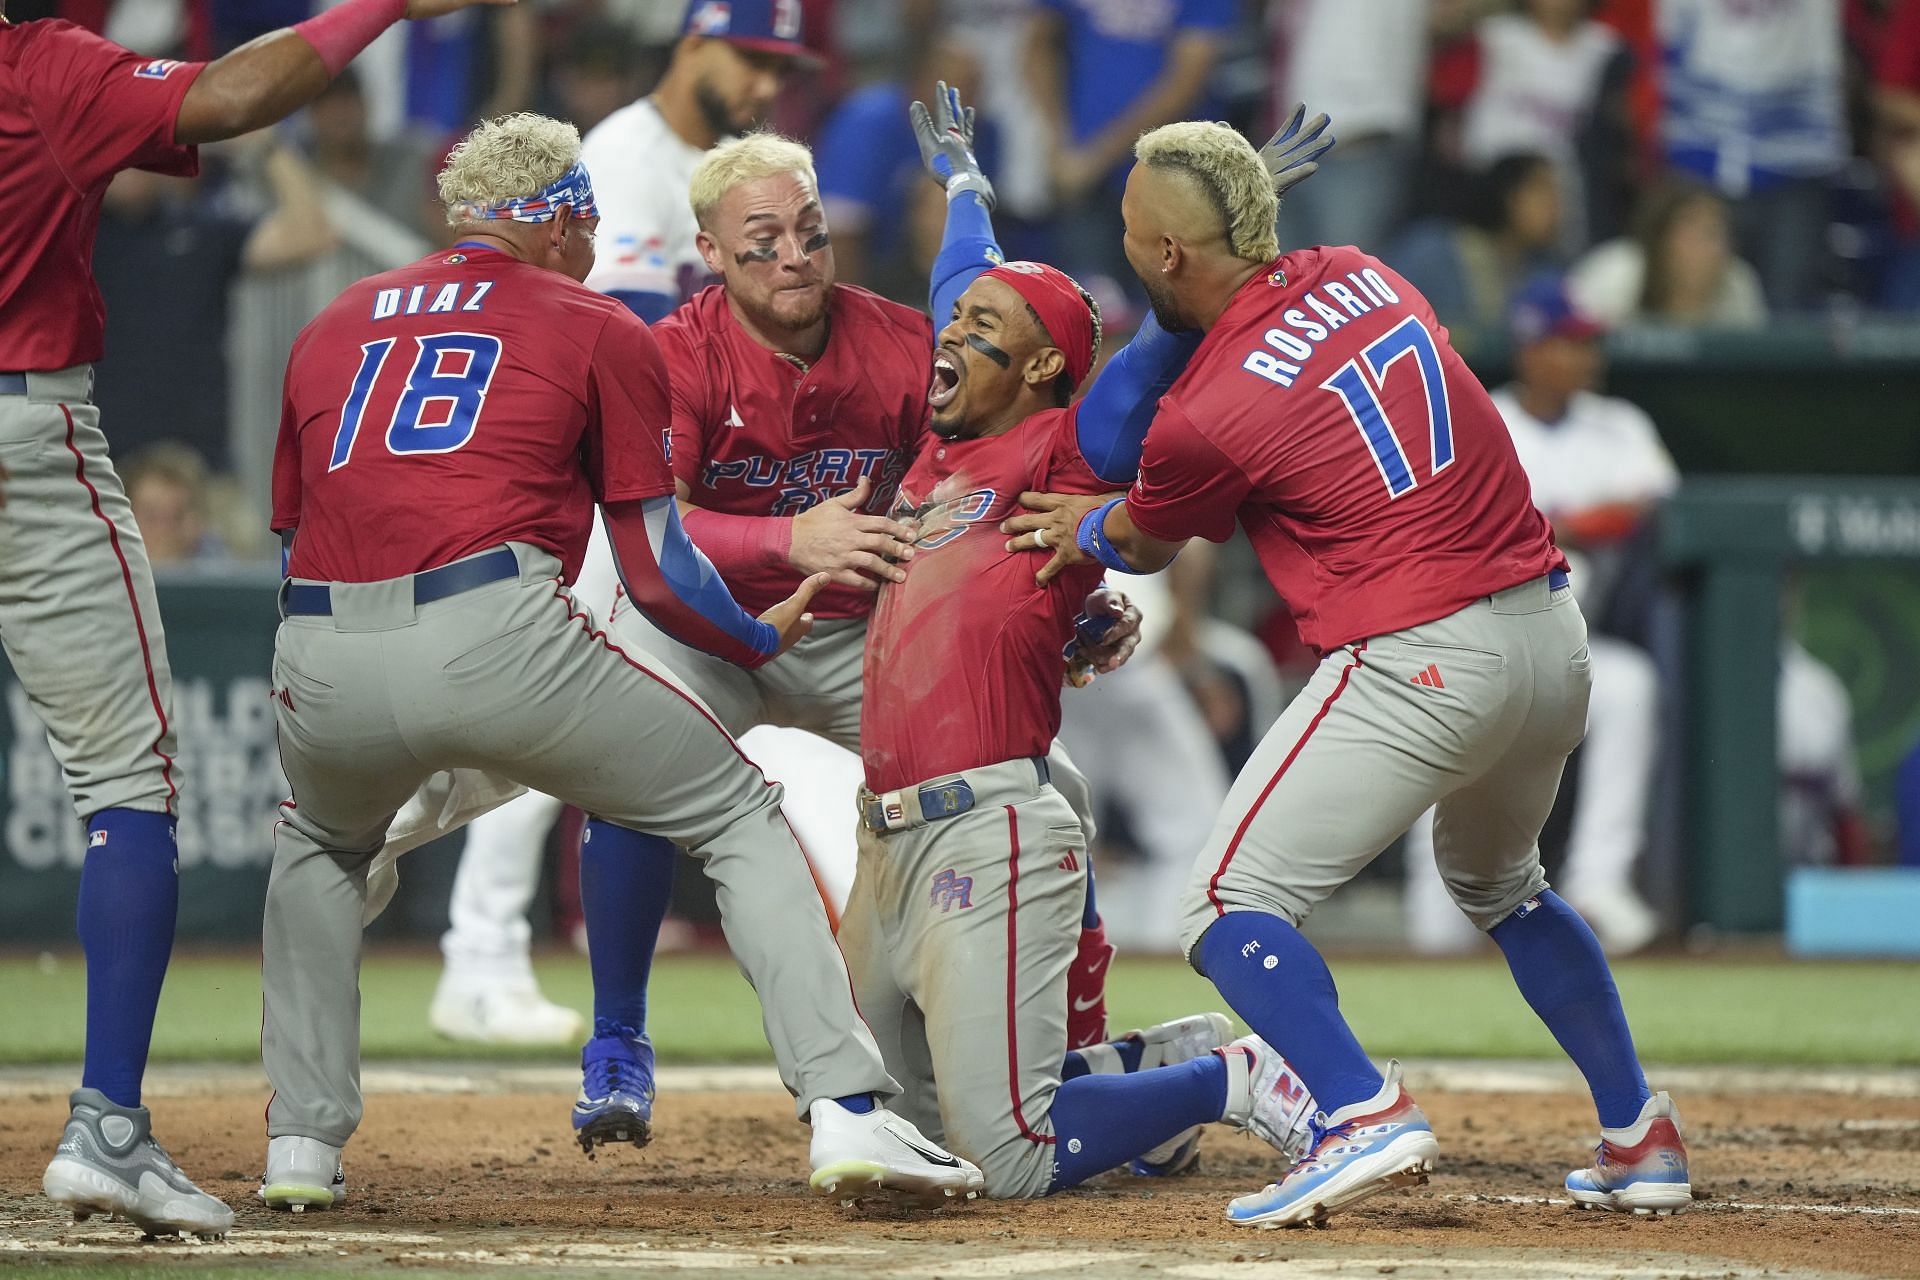 MLB Twitter stunned by Dominican Republic's star-studded roster for the  World Baseball Classic: Just an outrageous team, Scariest team in the  WBC